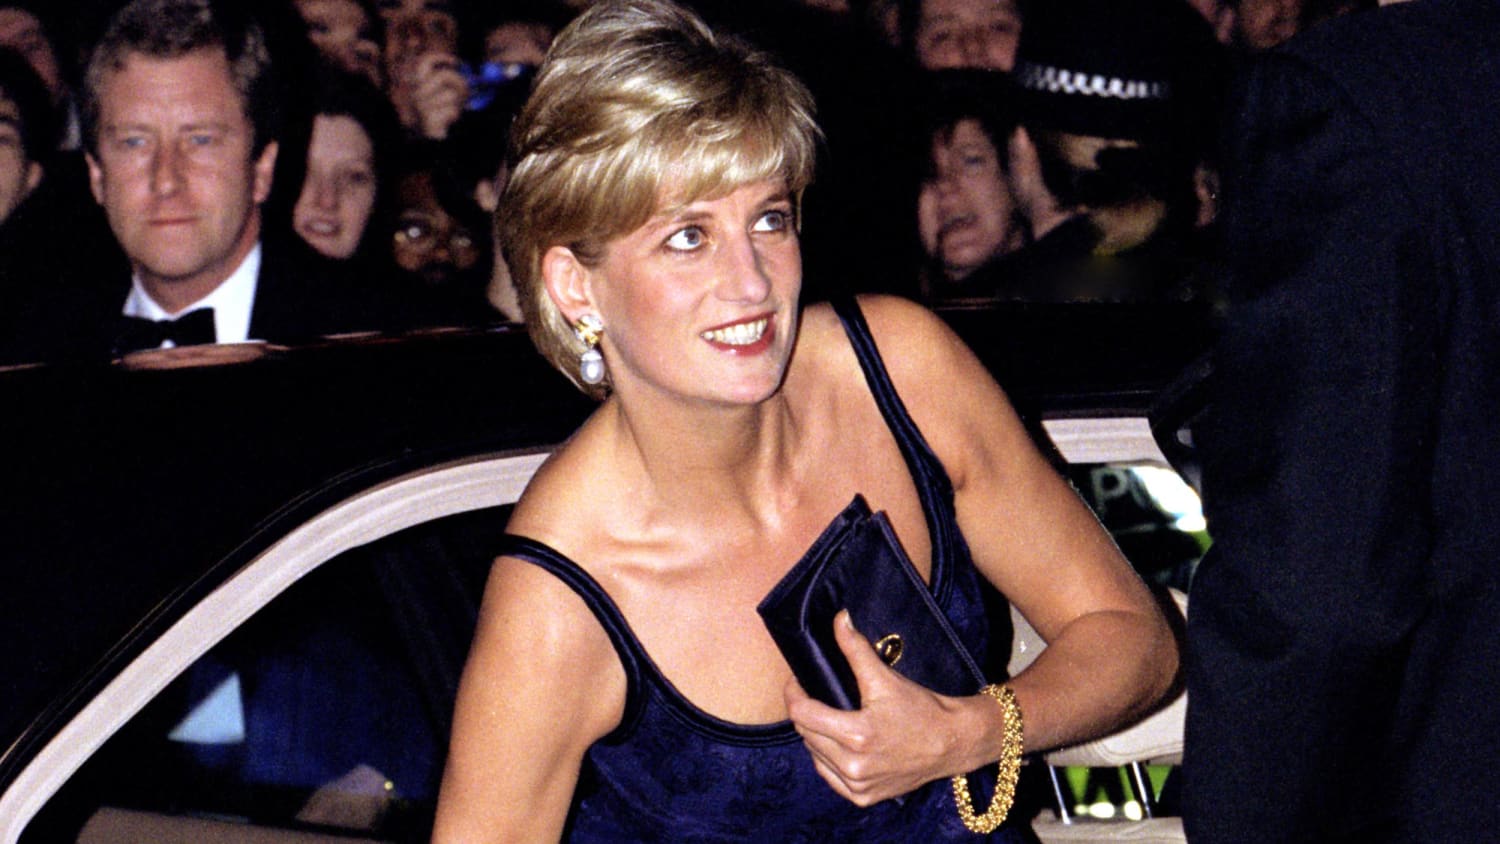 The story behind the picture: Why Diana always wore a clutch bag